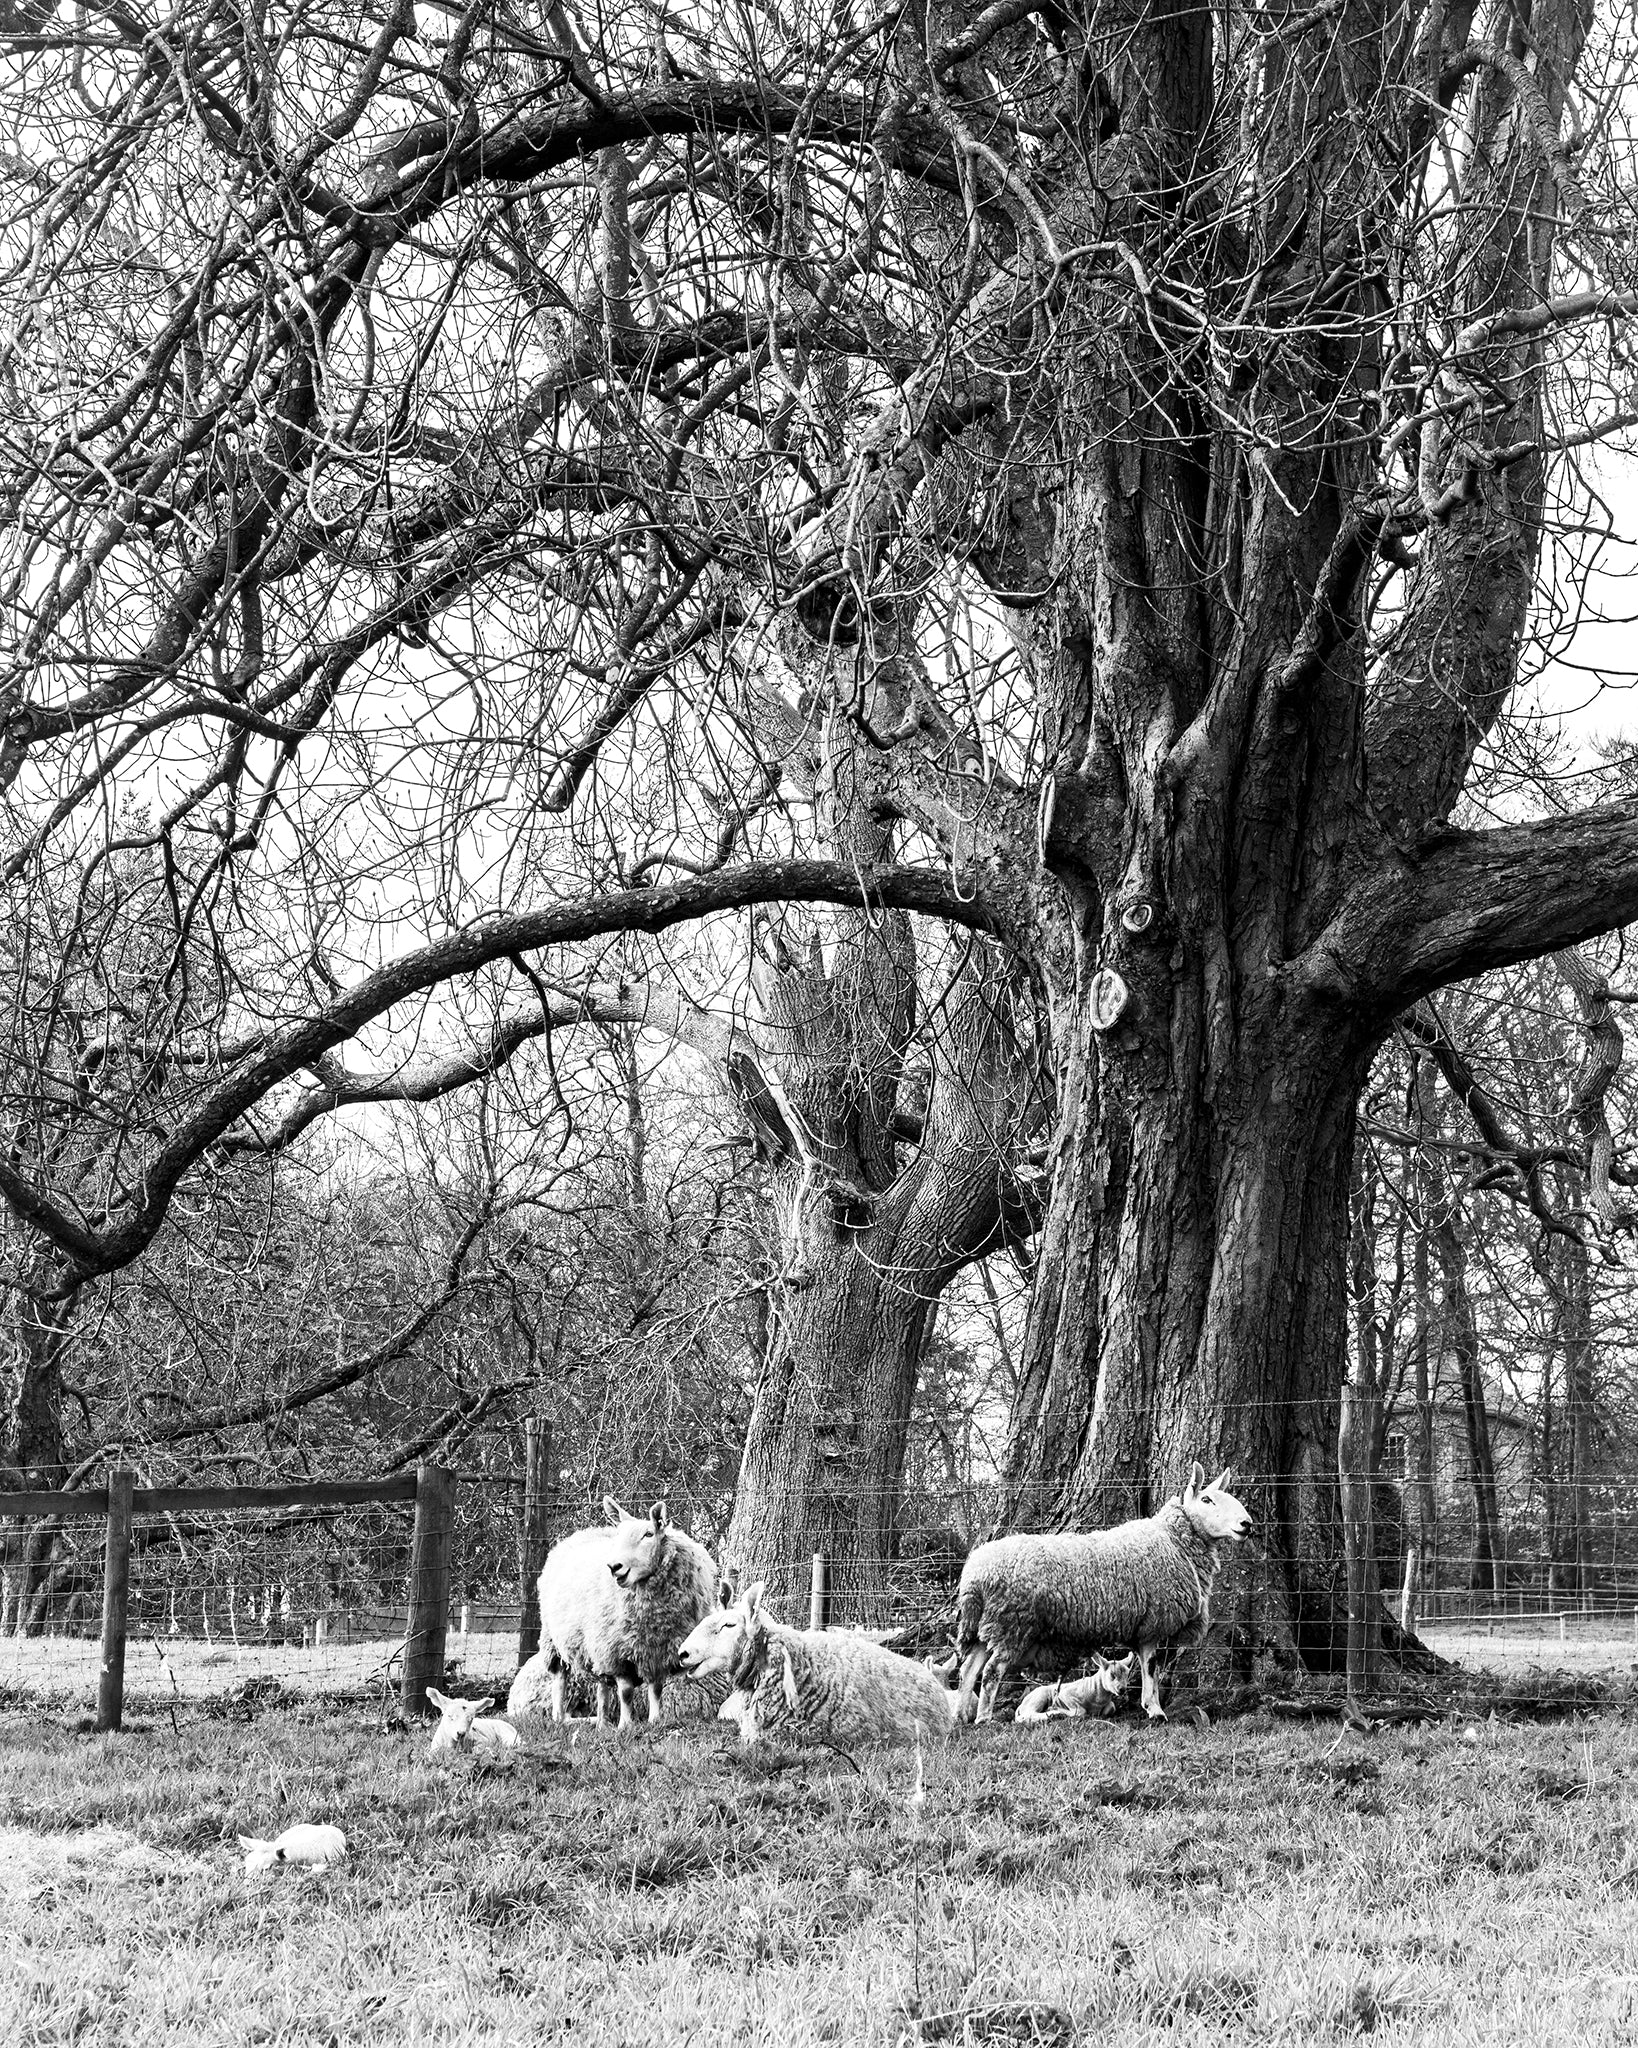 Sheep and their lambs under a tree